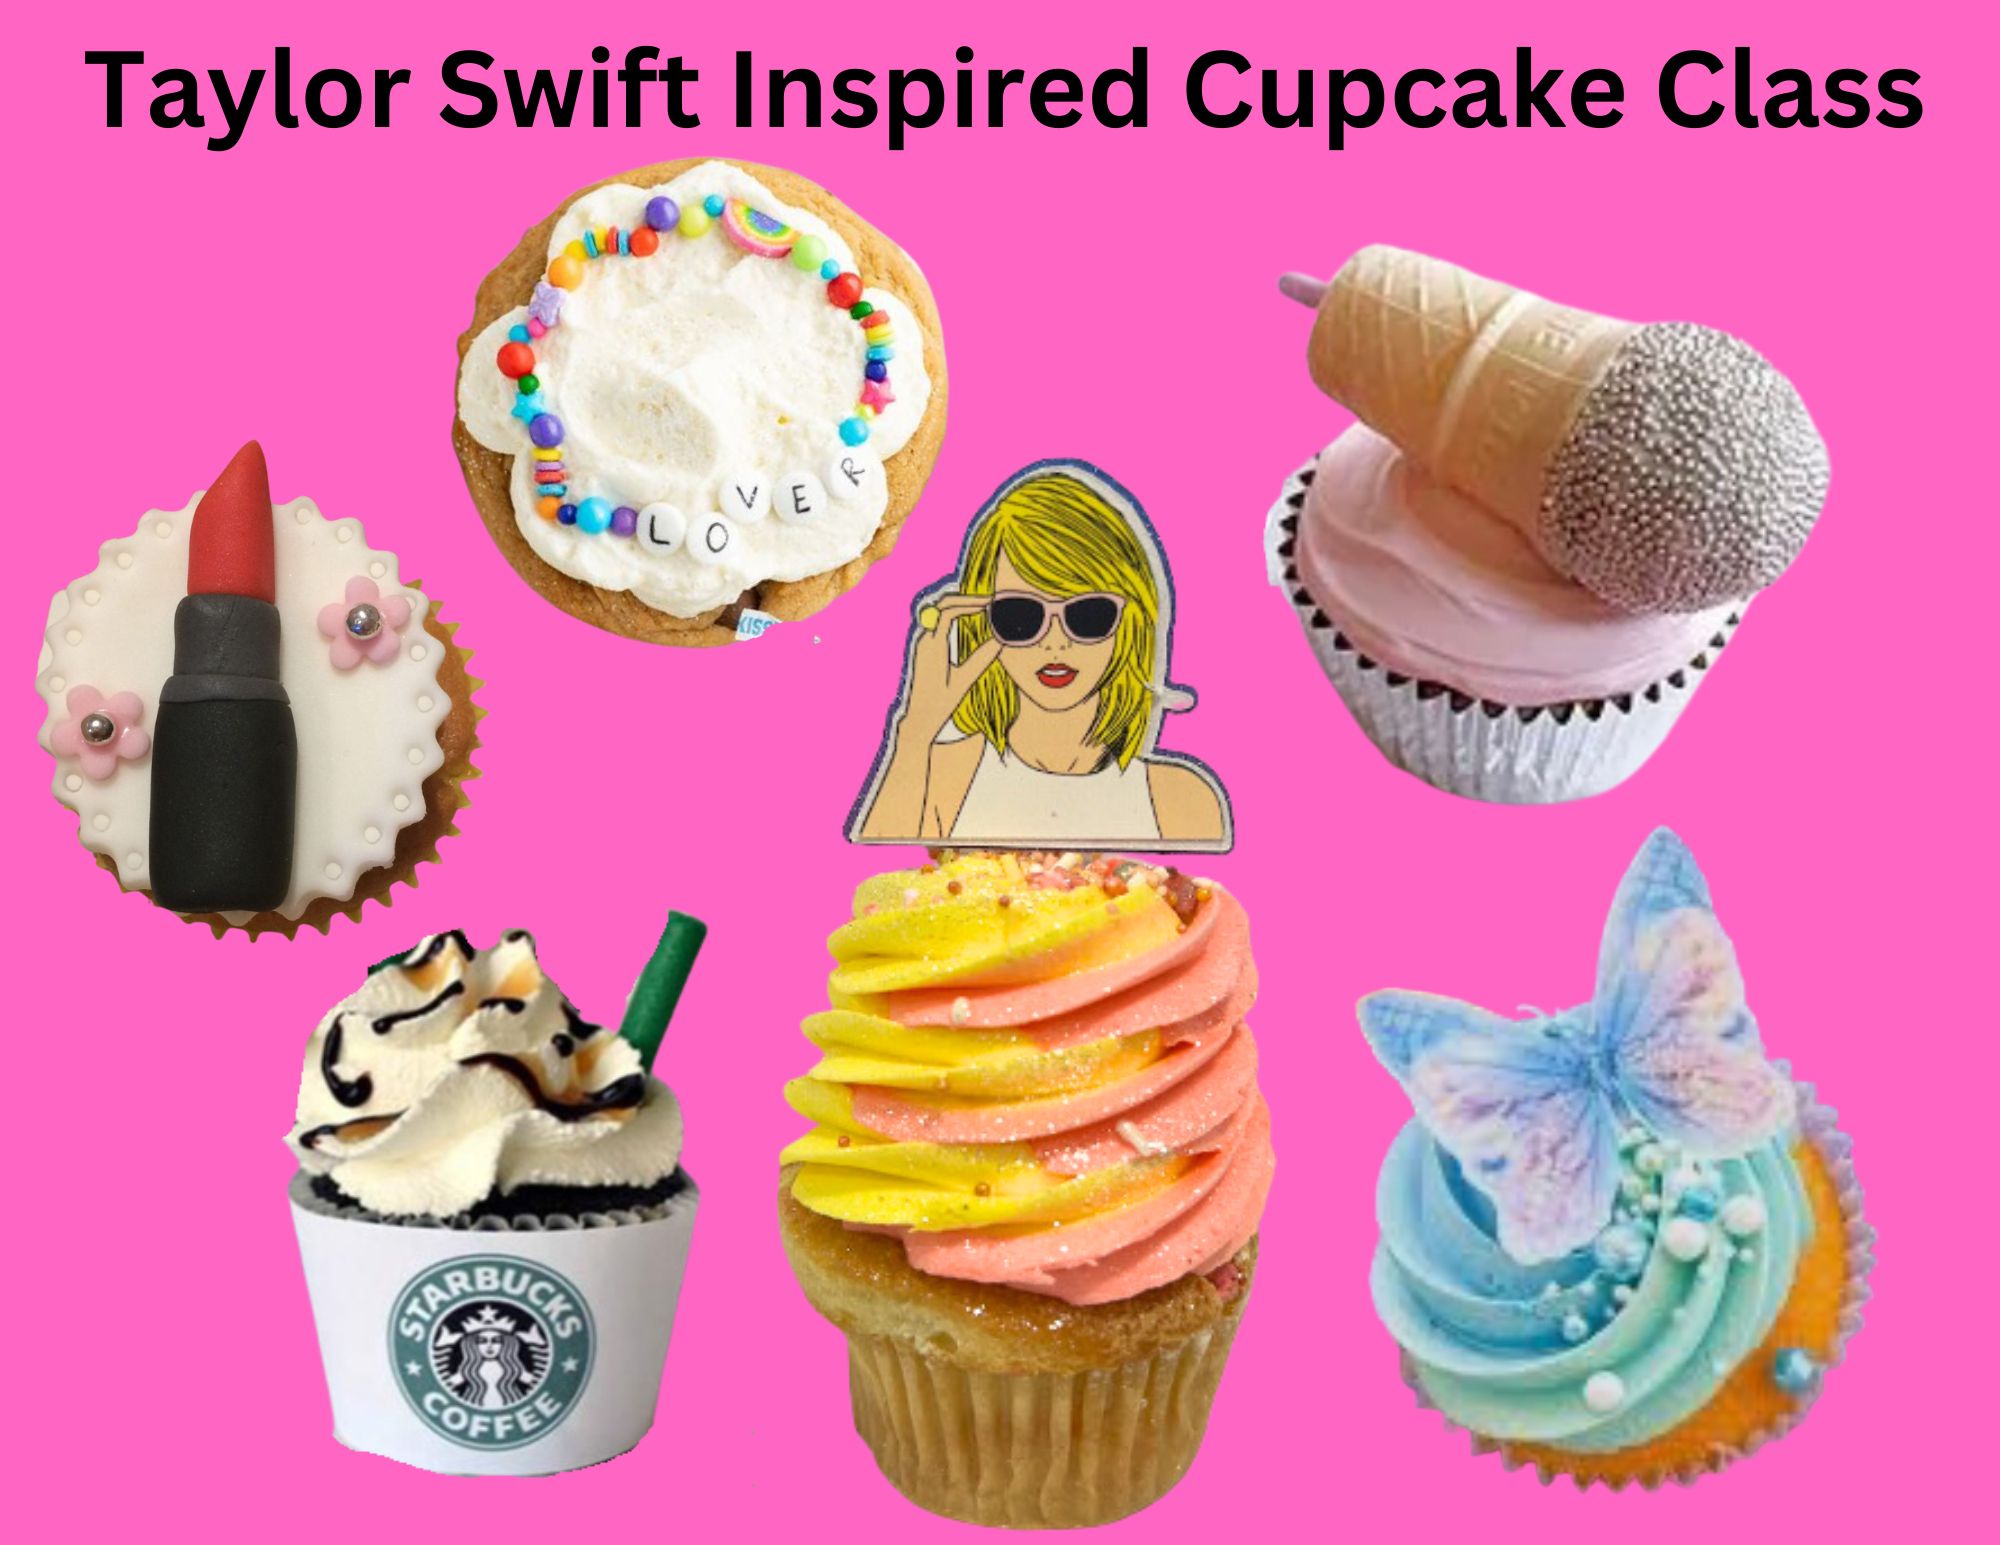 Taylor Swift Inspired Cupcakes